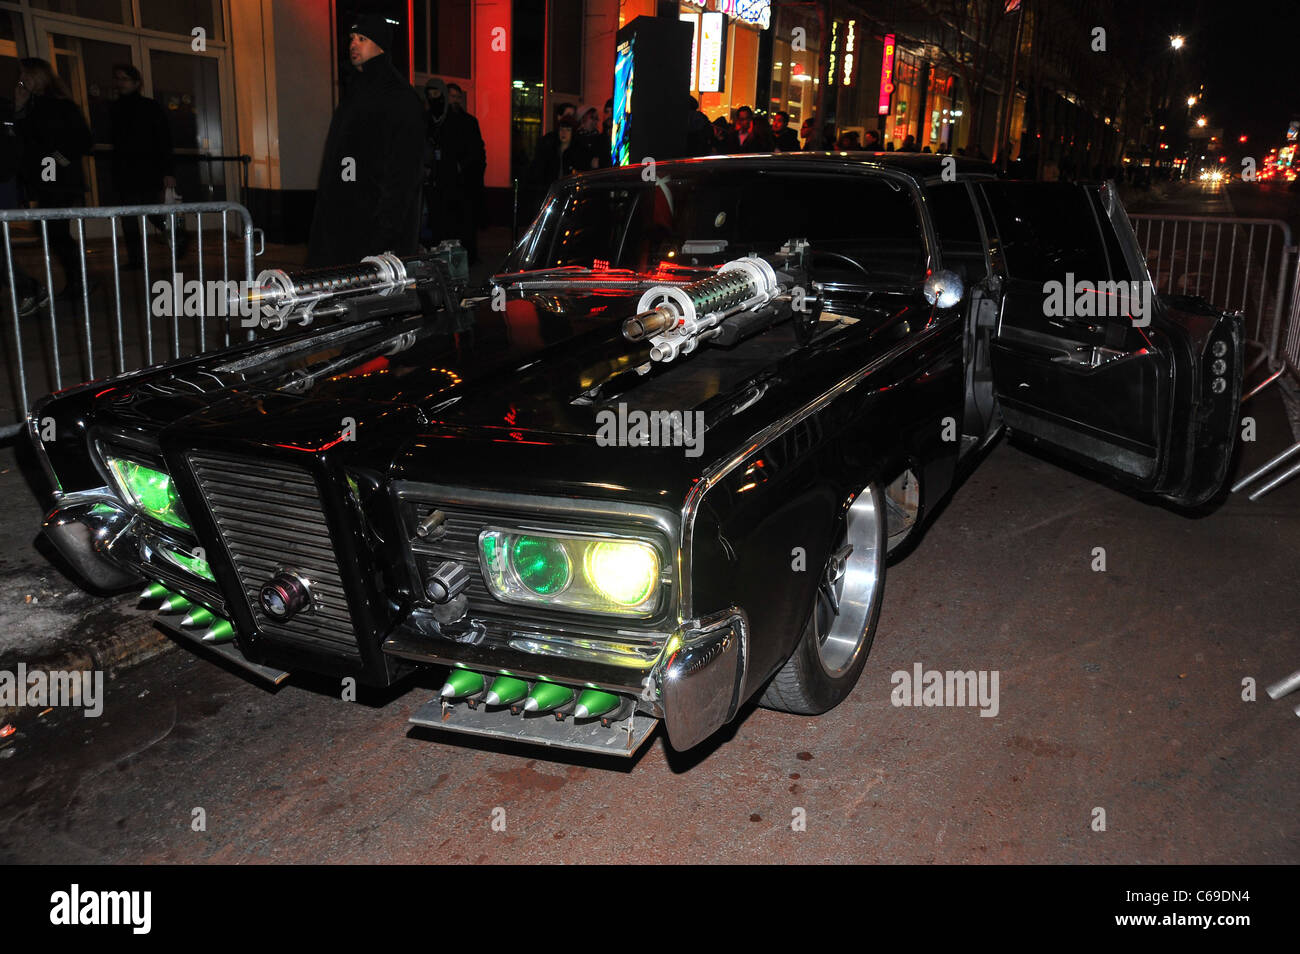 Black Beauty at a public appearance for THE GREEN HORNET Photo Op with Seth Rogen and The Black Beauty Car, AMC 34th Street Theater, New York, NY January 6, 2011. Photo By: Gregorio T. Binuya/Everett Collection Stock Photo